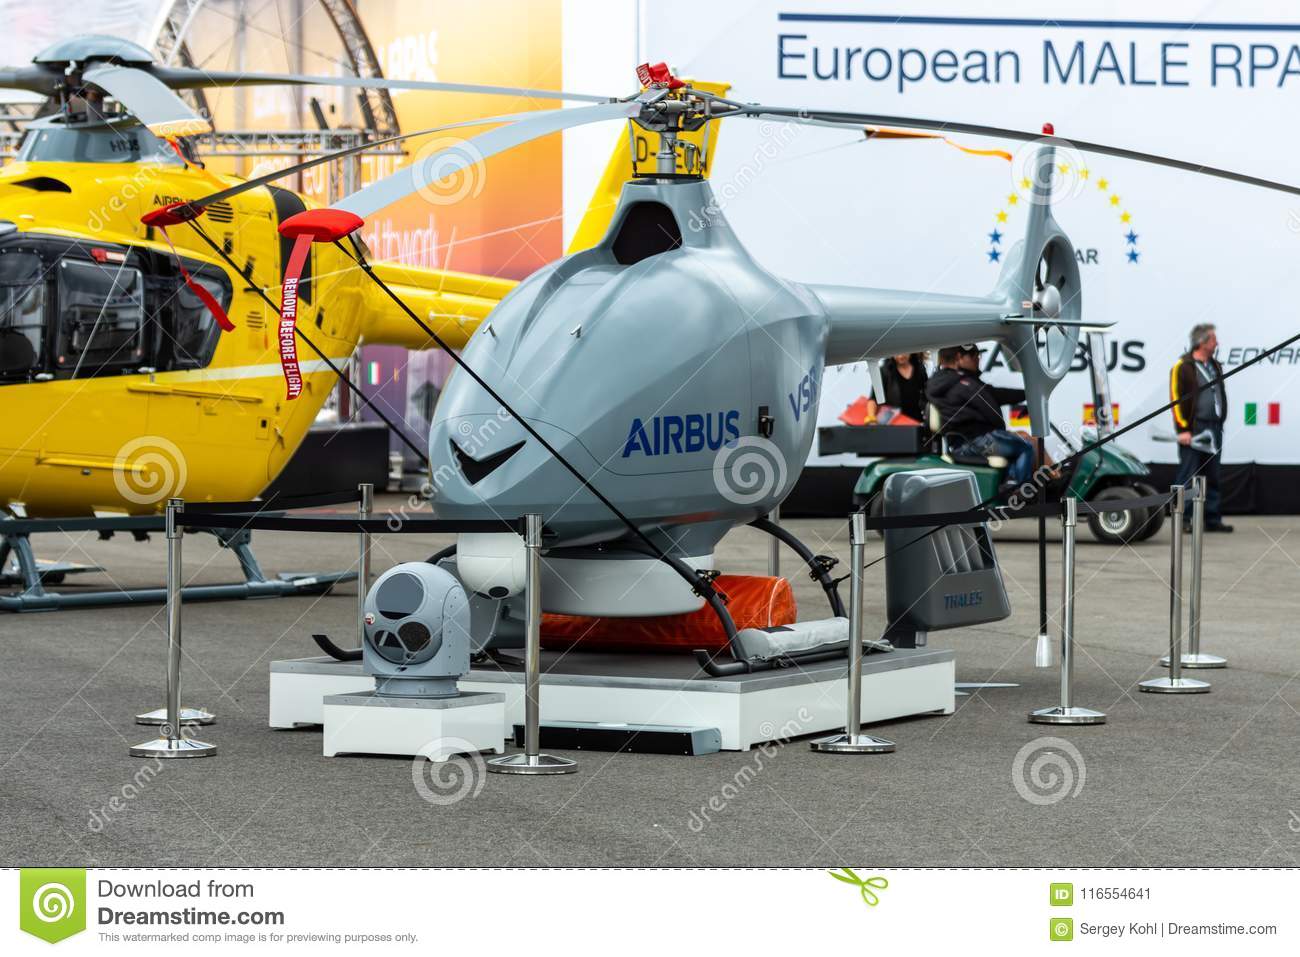 unmanned-reconnaissance-helicopter-airbus-vsr-berlin-germany-april-exhibition-ila-air-show-116554641.jpg